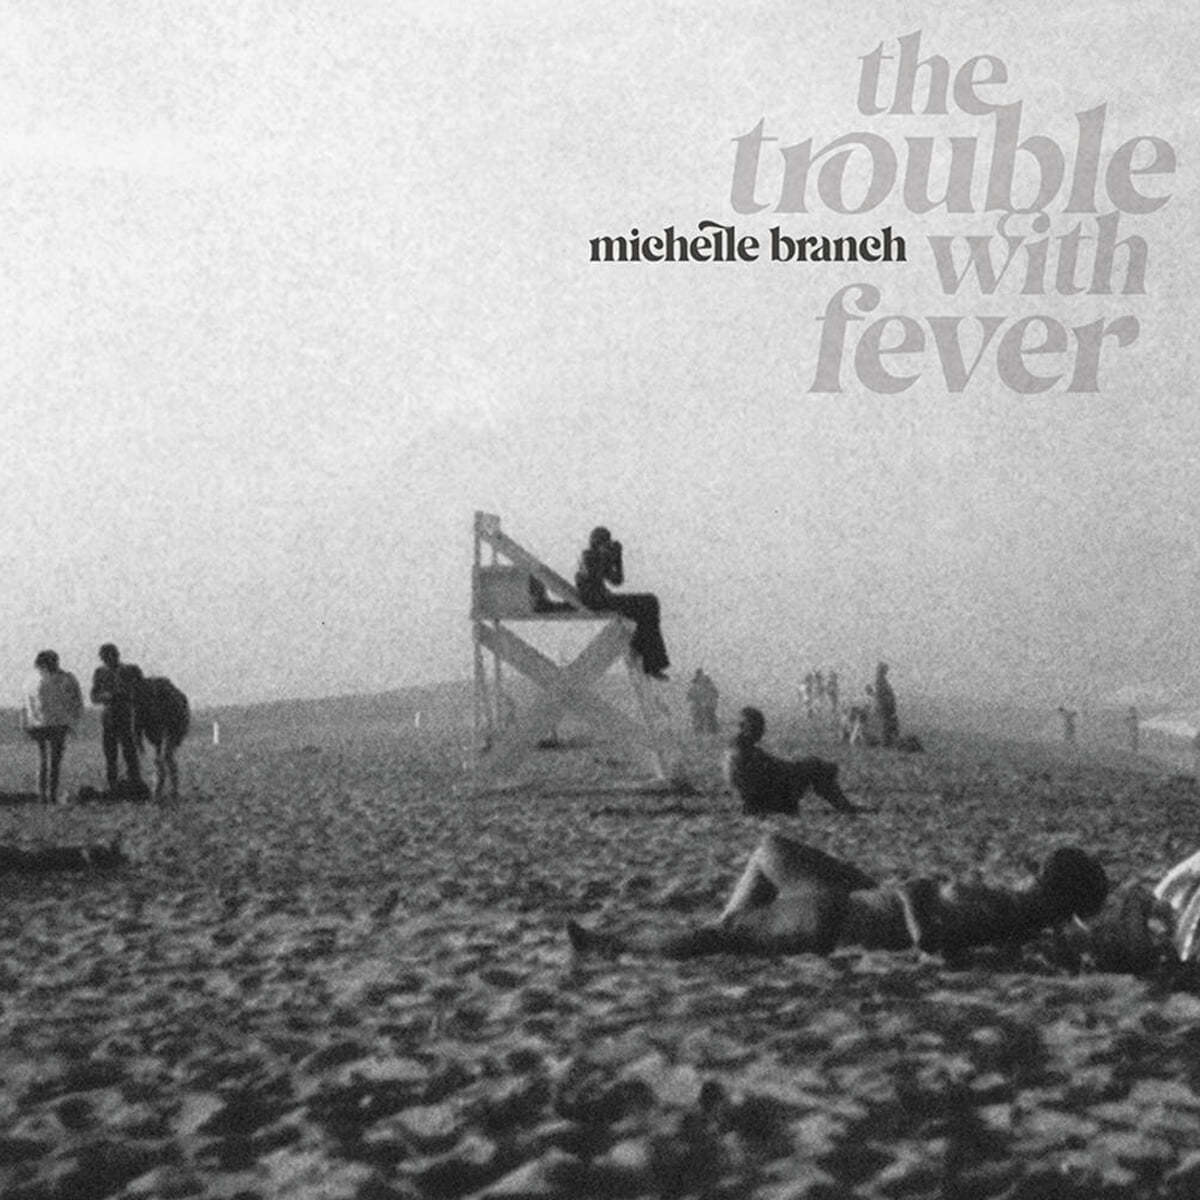 Michelle Branch (미셸 브랜치) - The Trouble With Fever 